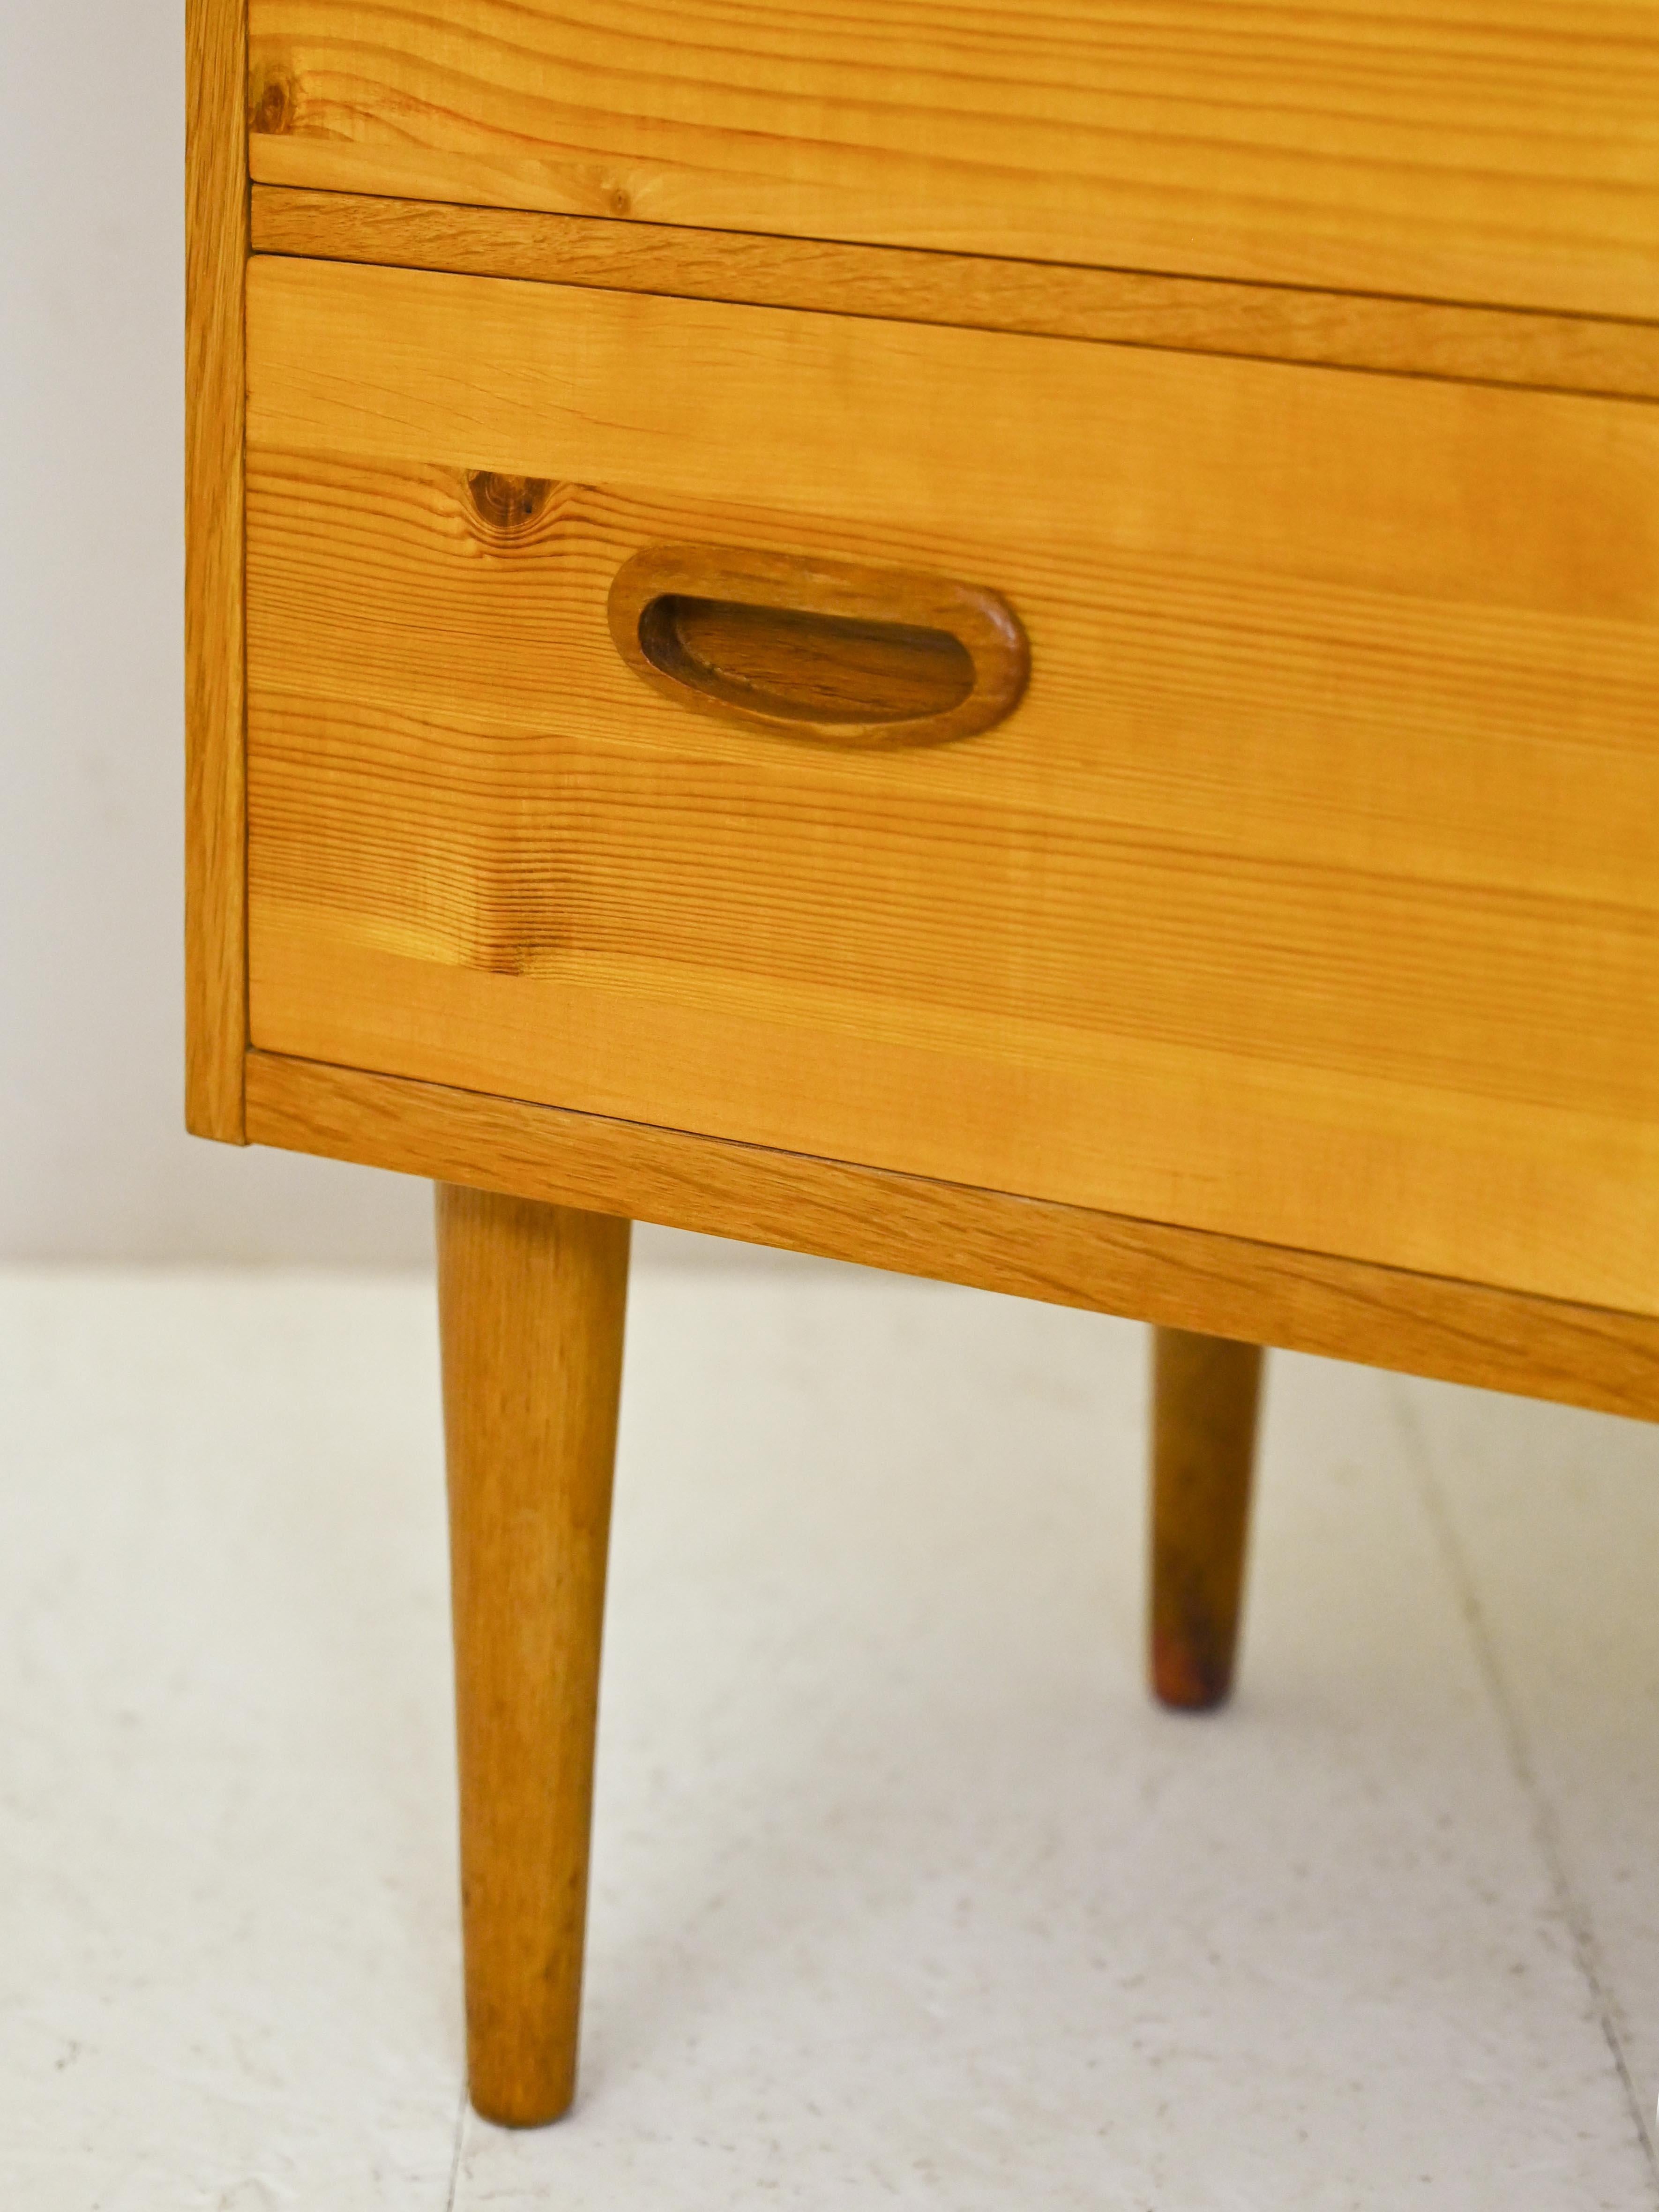 Swedish Modernist Chest of Drawers from the 1960s For Sale 1